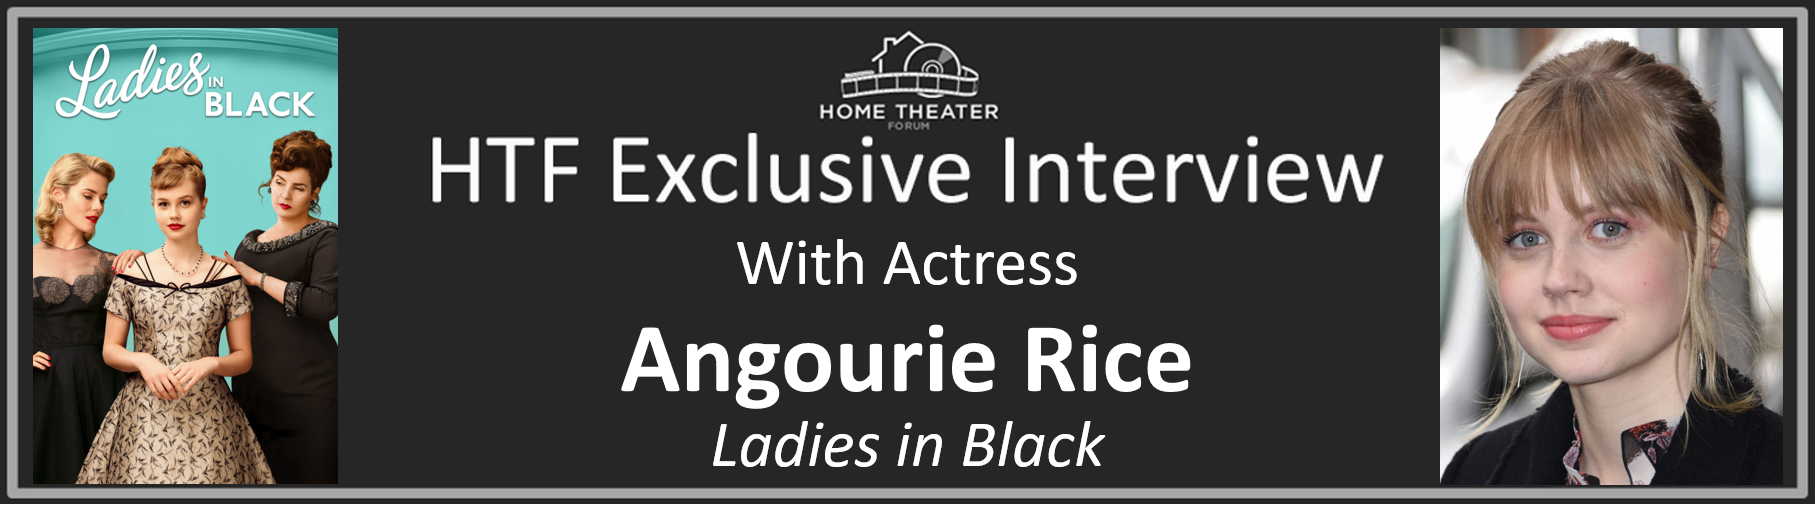 HTF_Banner_Angourie_Rice.png